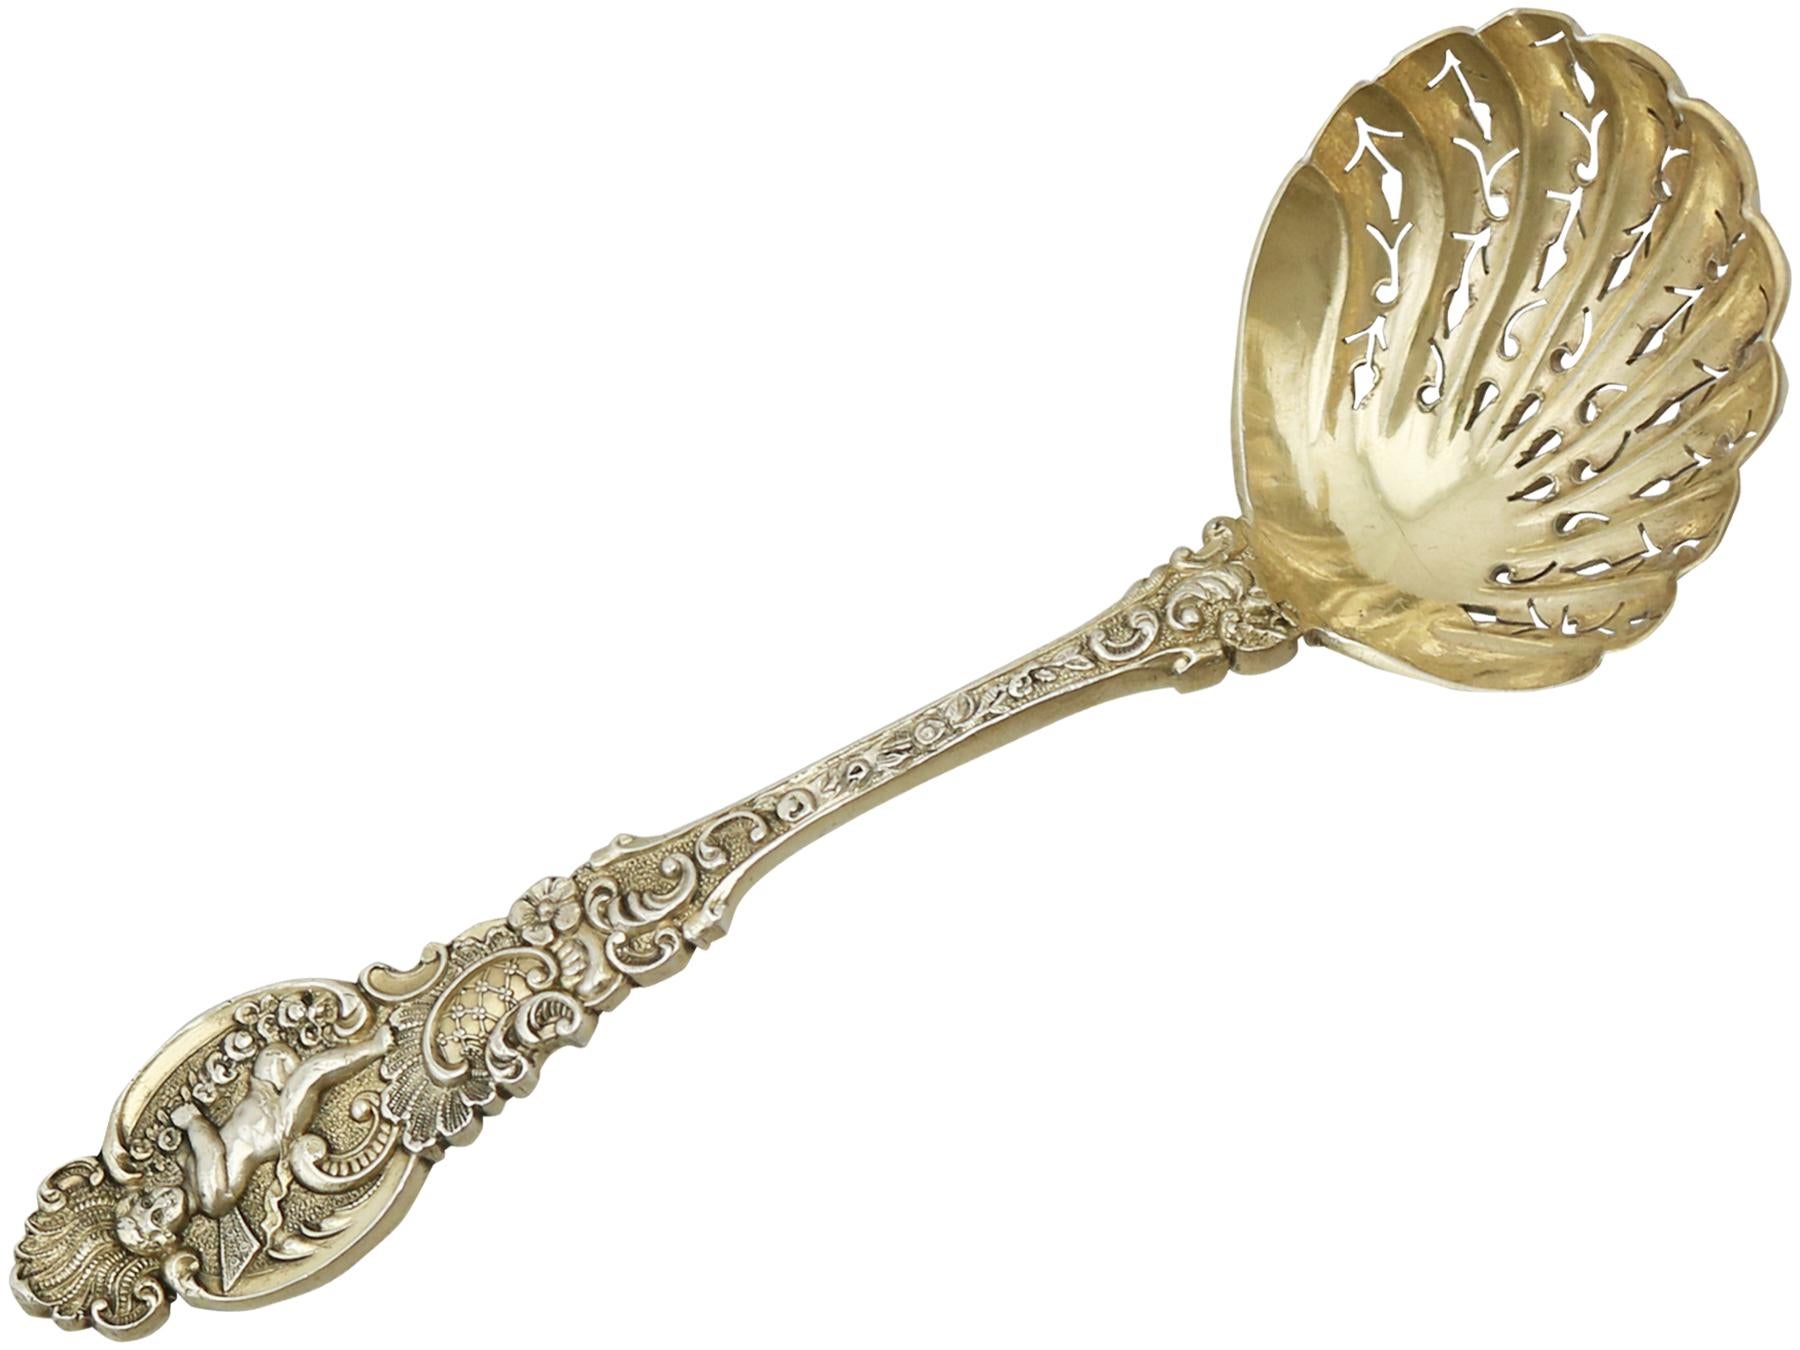 1890s Victorian Sterling Silver Gilt Sugar Sifter Spoon and Bowl For Sale 4